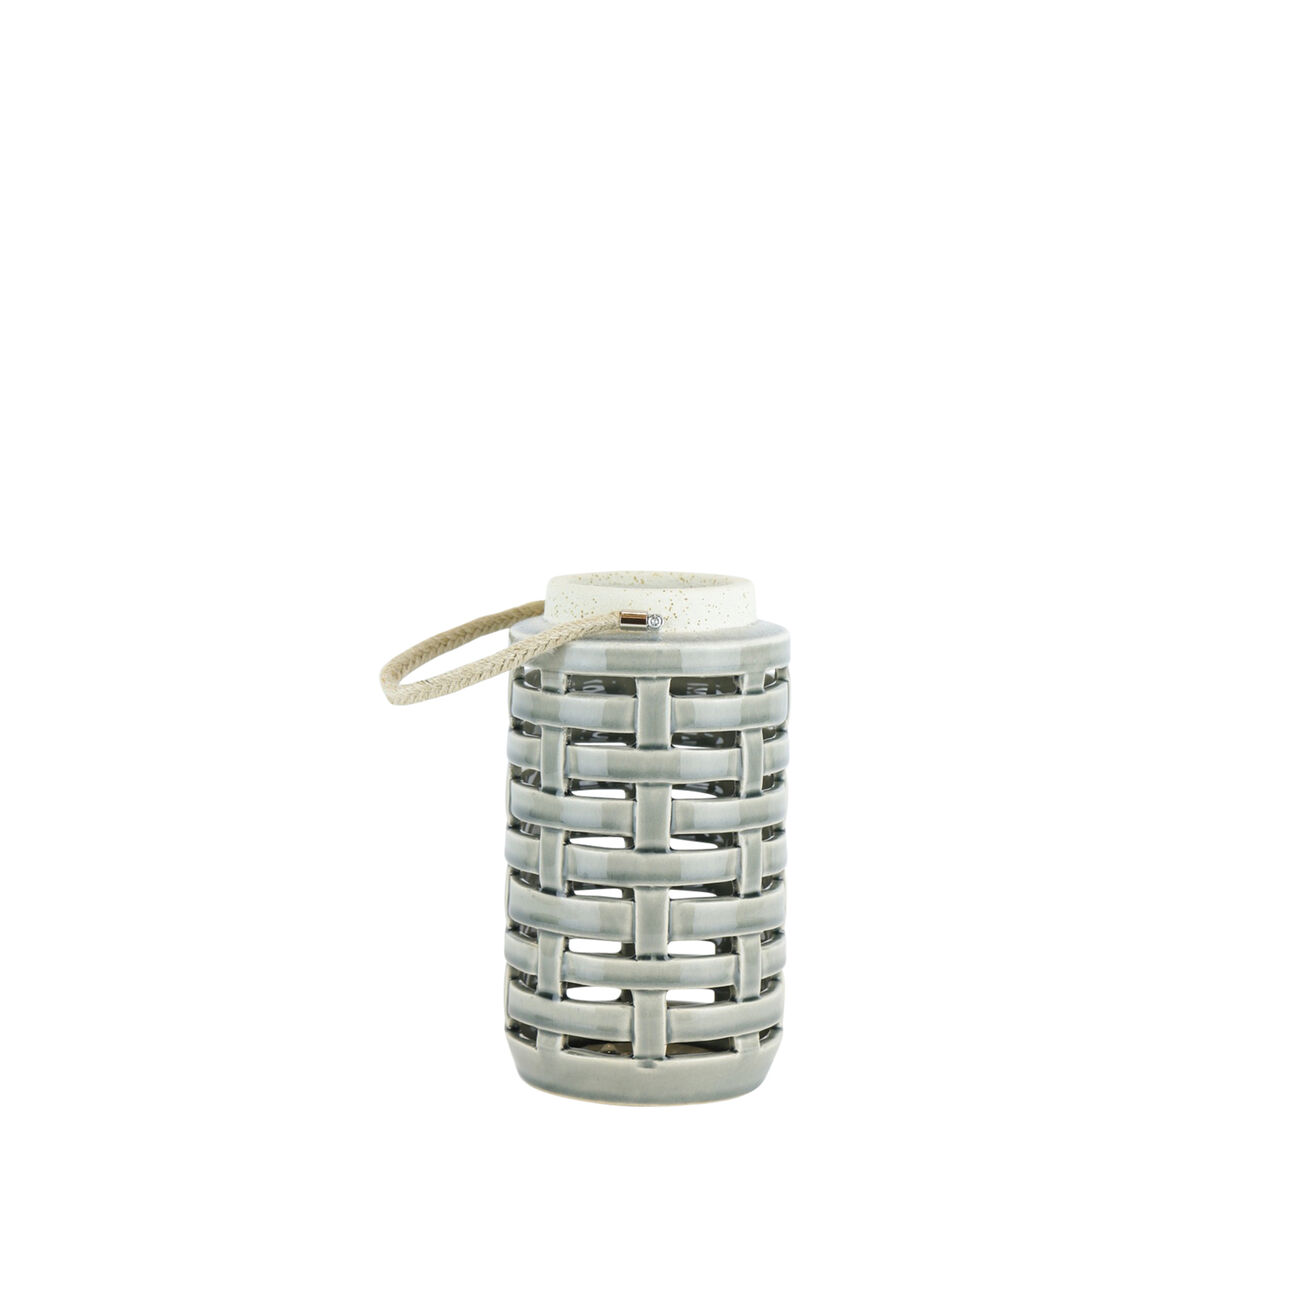 Lattice Cutout Patterned Ceramic Lantern with Rope Handle, White and Gray